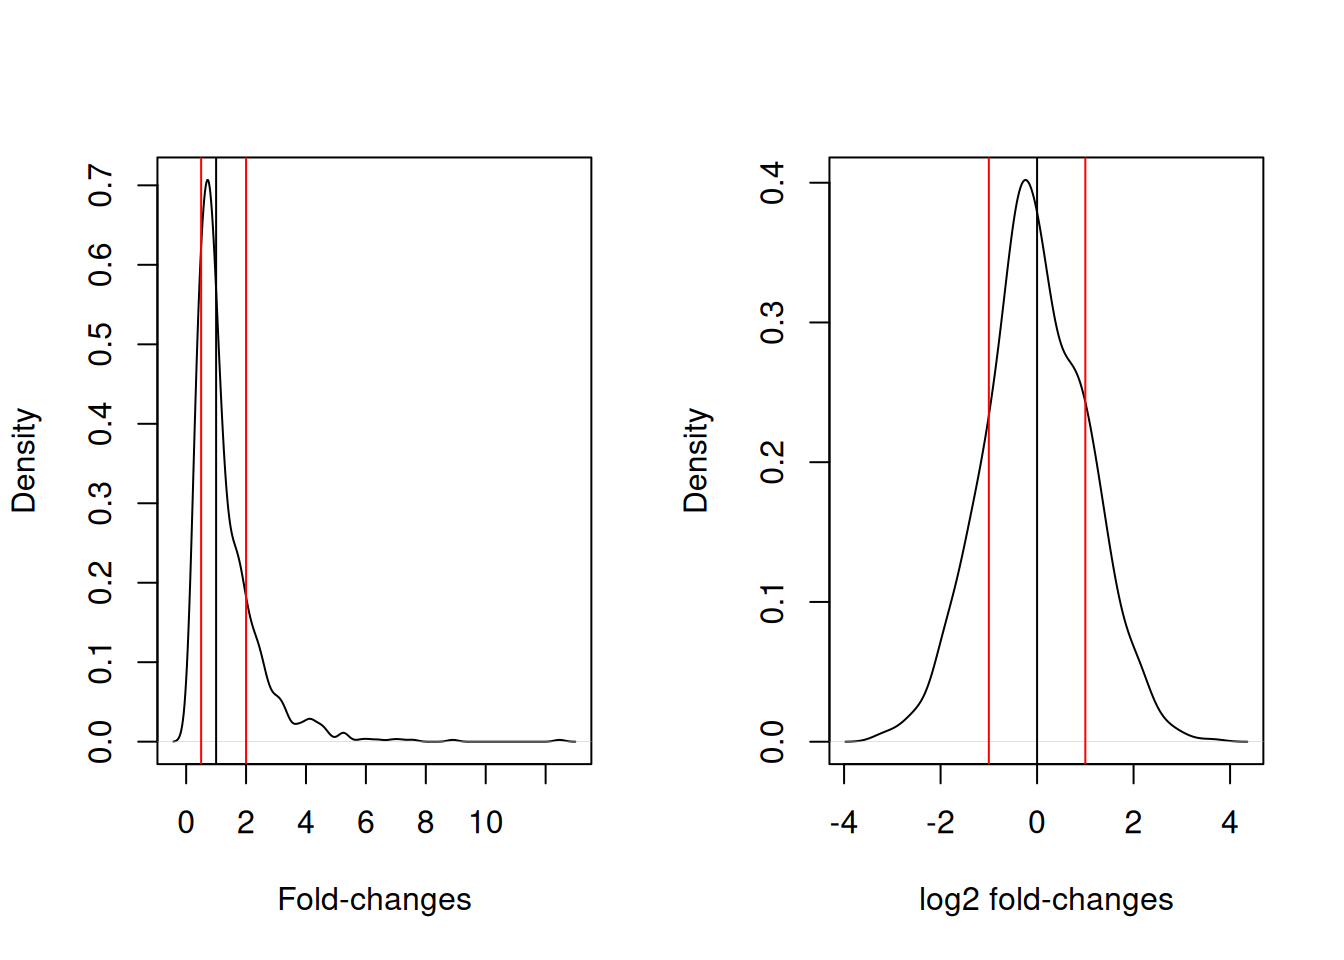 Non-symetric fold-changes (left) and symetric log fold-changes (right) distributions..